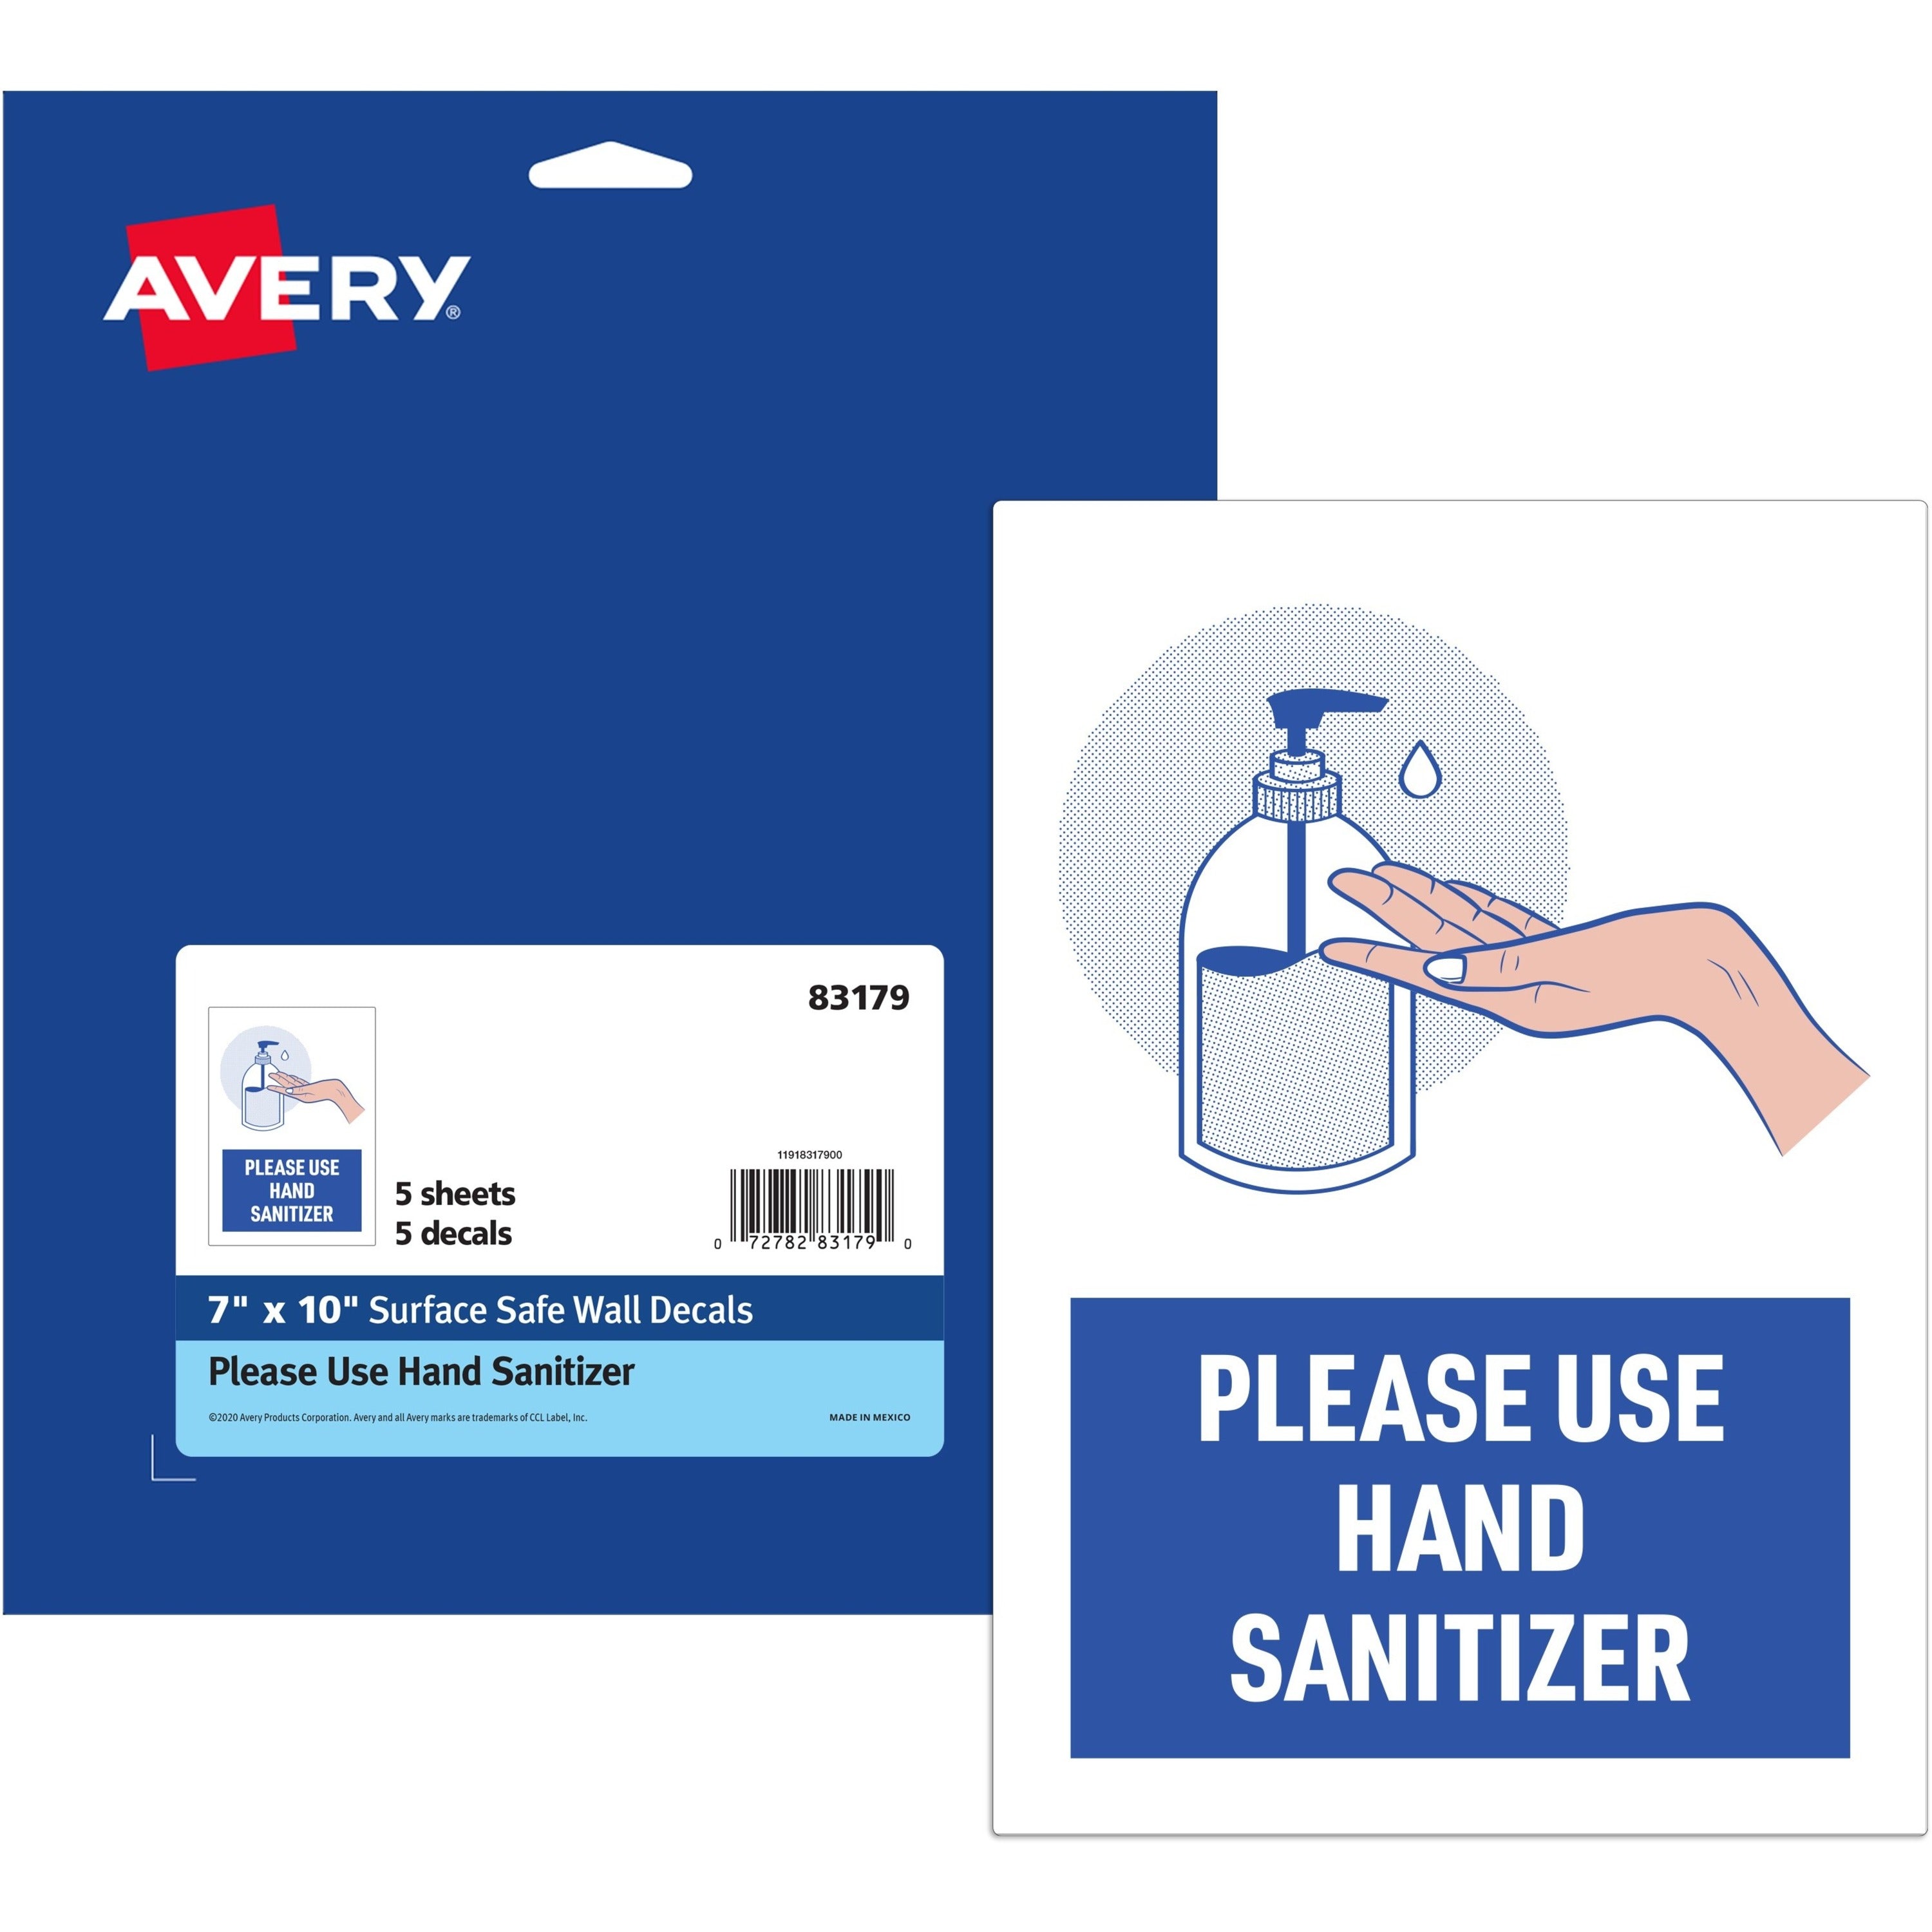 avery-surface-safe-use-hand-sanitizer-wall-decals-5-pack-please-use-hand-sanitizer-print-message-7-width-x-10-height-rectangular-shape-water-resistant-pre-printed-chemical-resistant-abrasion-resistant-tear-resistant-durable-u_ave83179 - 1